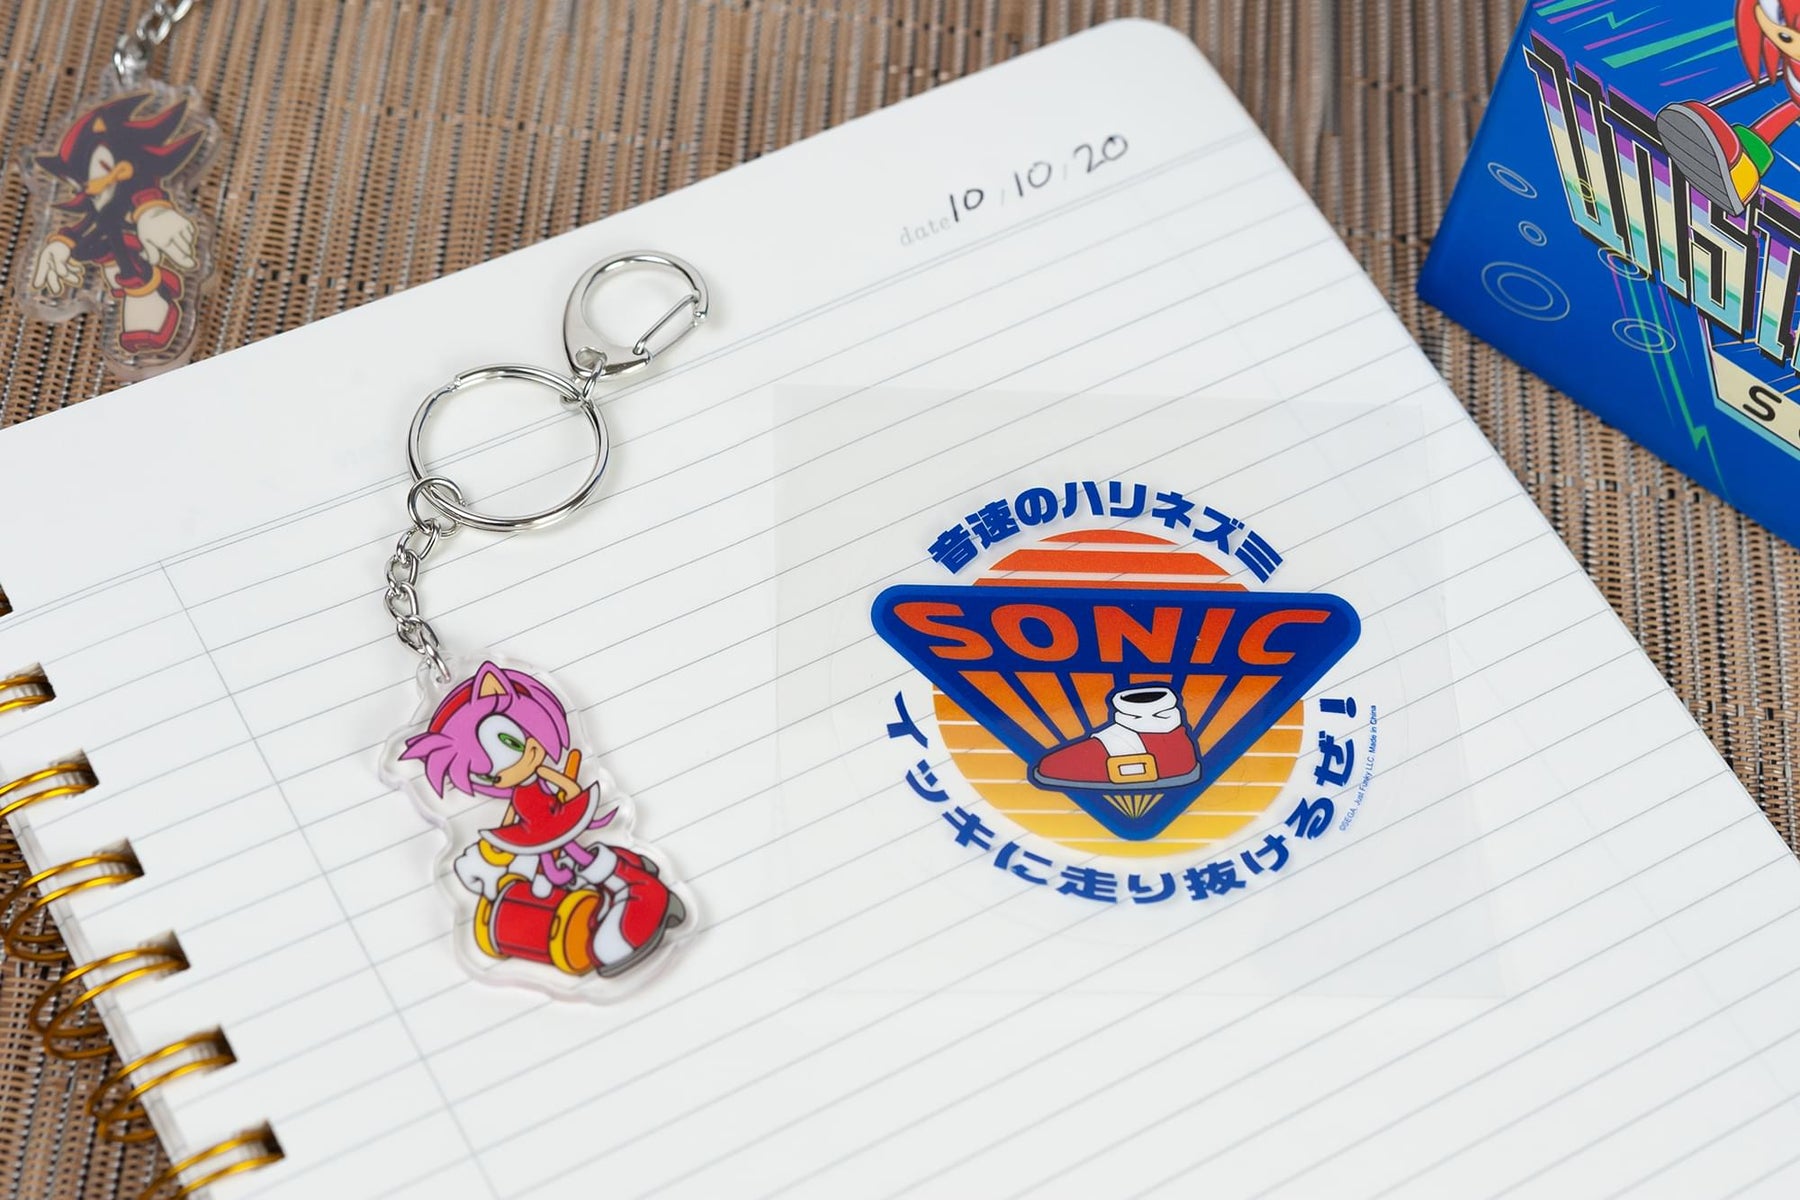 Sonic the Hedgehog Retro Arcade Collector Looksee Box | Includes 5 Themed Collectibles